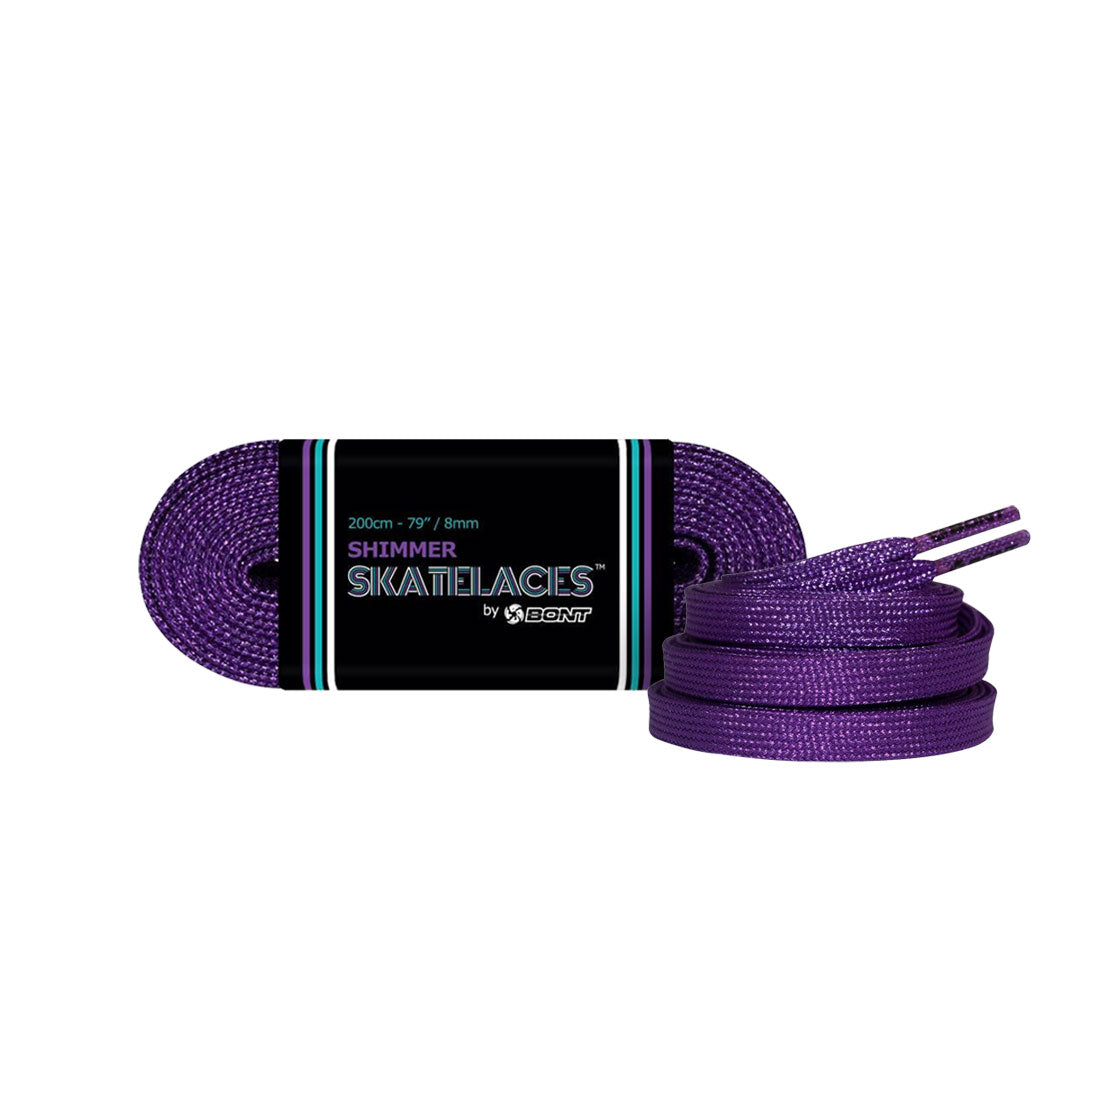 Bont Shimmer 8mm Laces - 245cm/96in Smoked Amethyst Laces